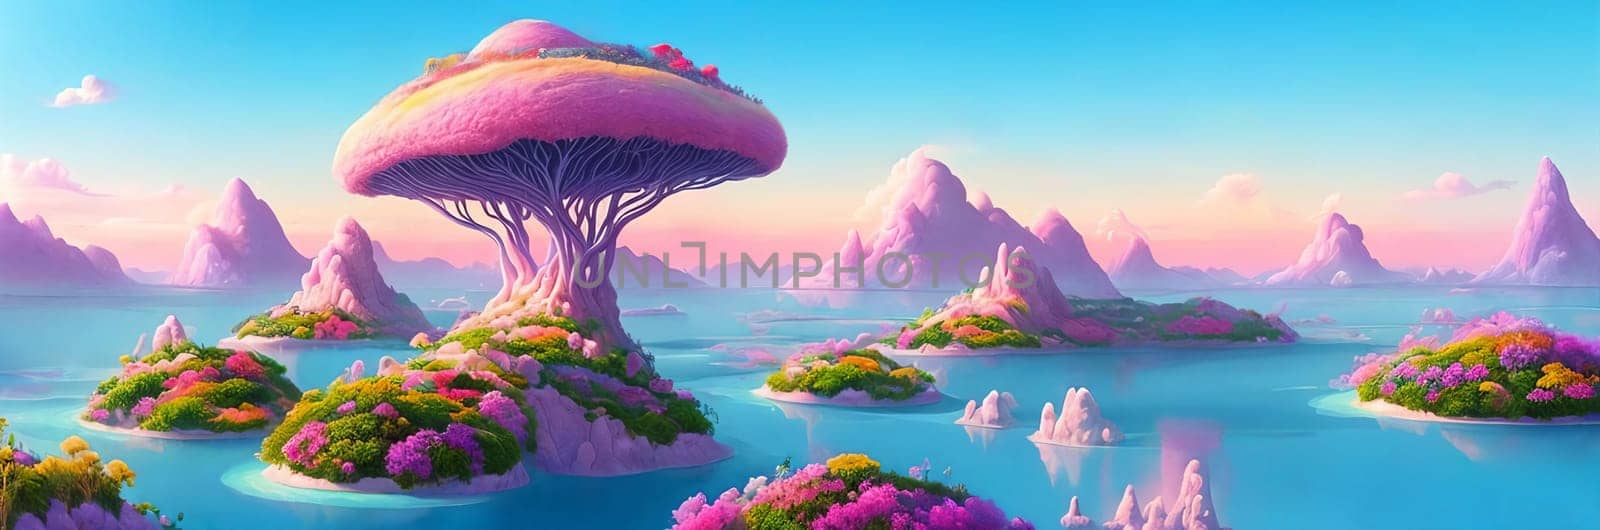 Surreal and dreamlike landscape of floating islands suspended in a pastel-colored sky by GoodOlga